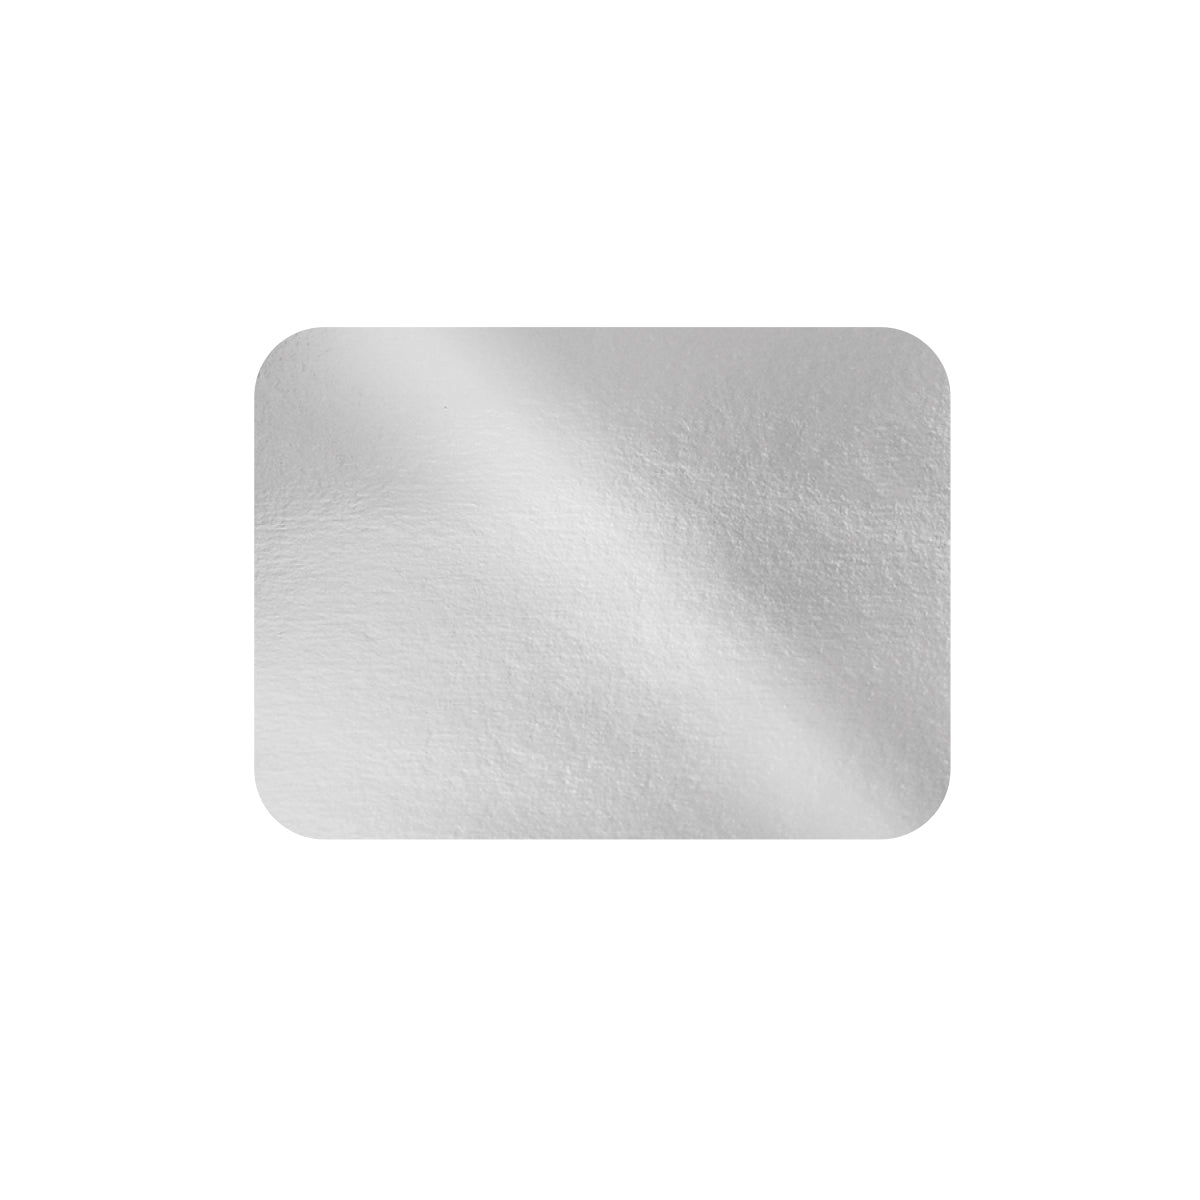 Lid for 1 LB Oblong Take Out Pan | Paper Board